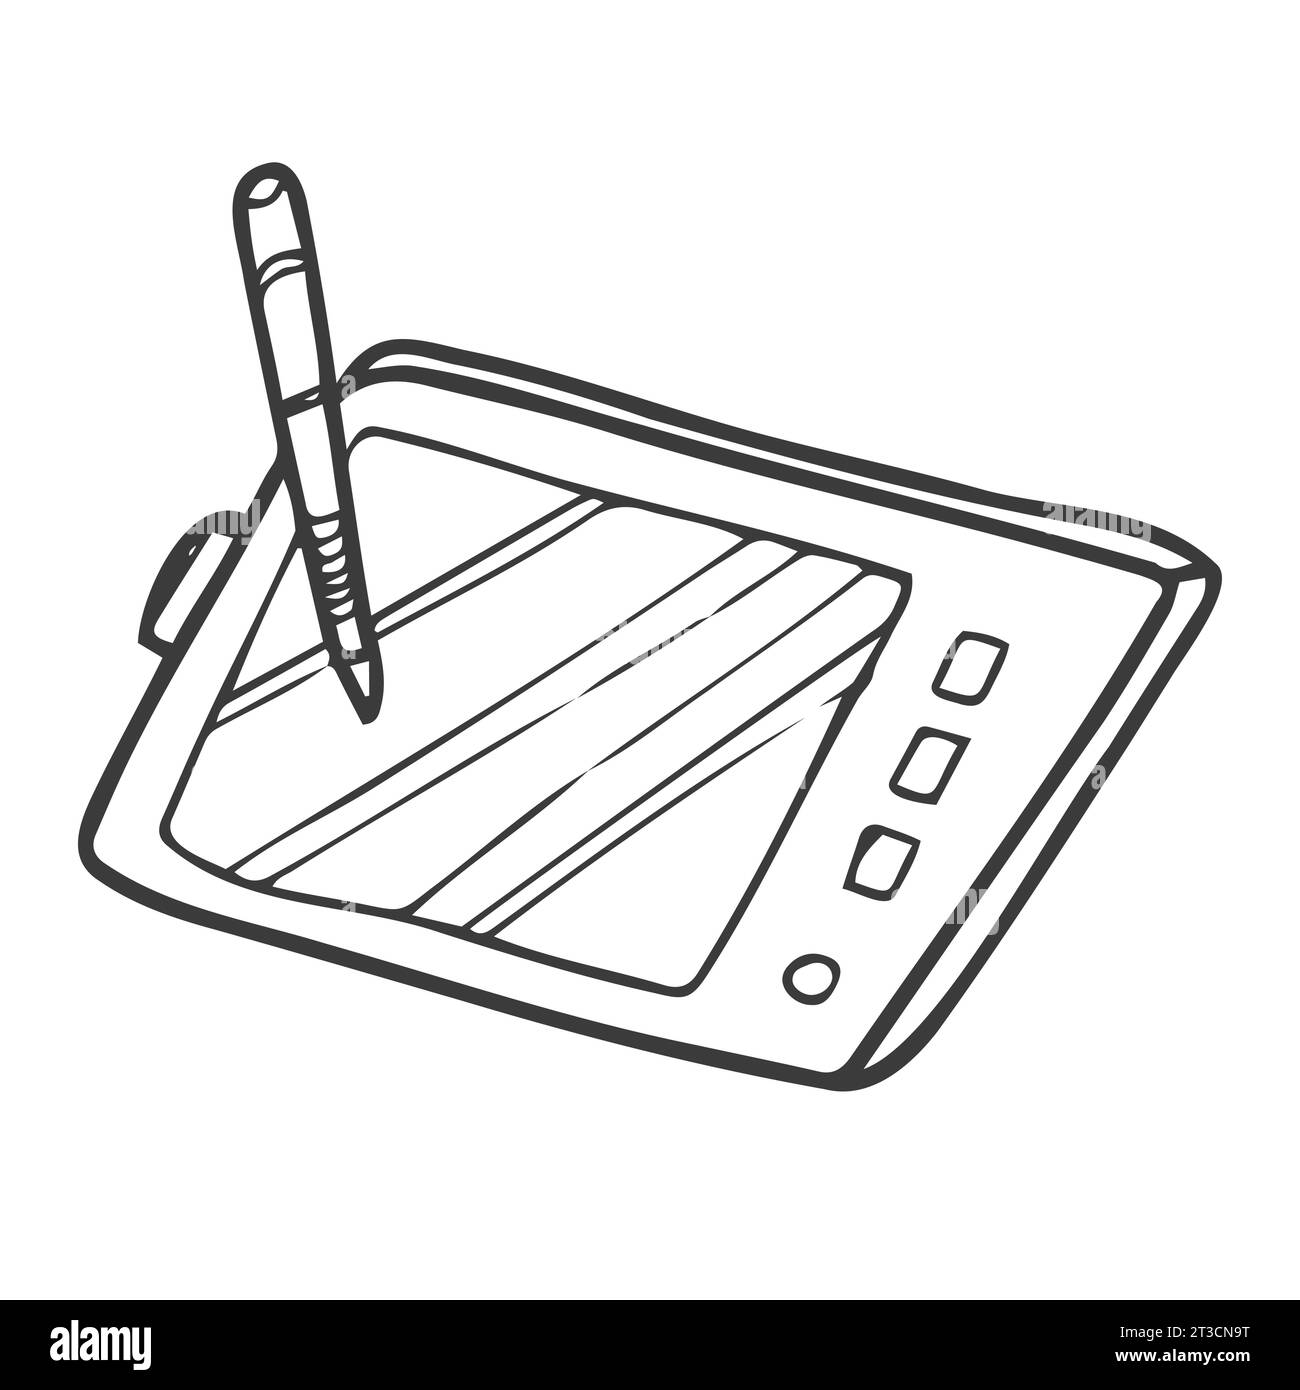 Doodle of digital tablet - black and white illustration. Hand drawn doodle Stock Vector